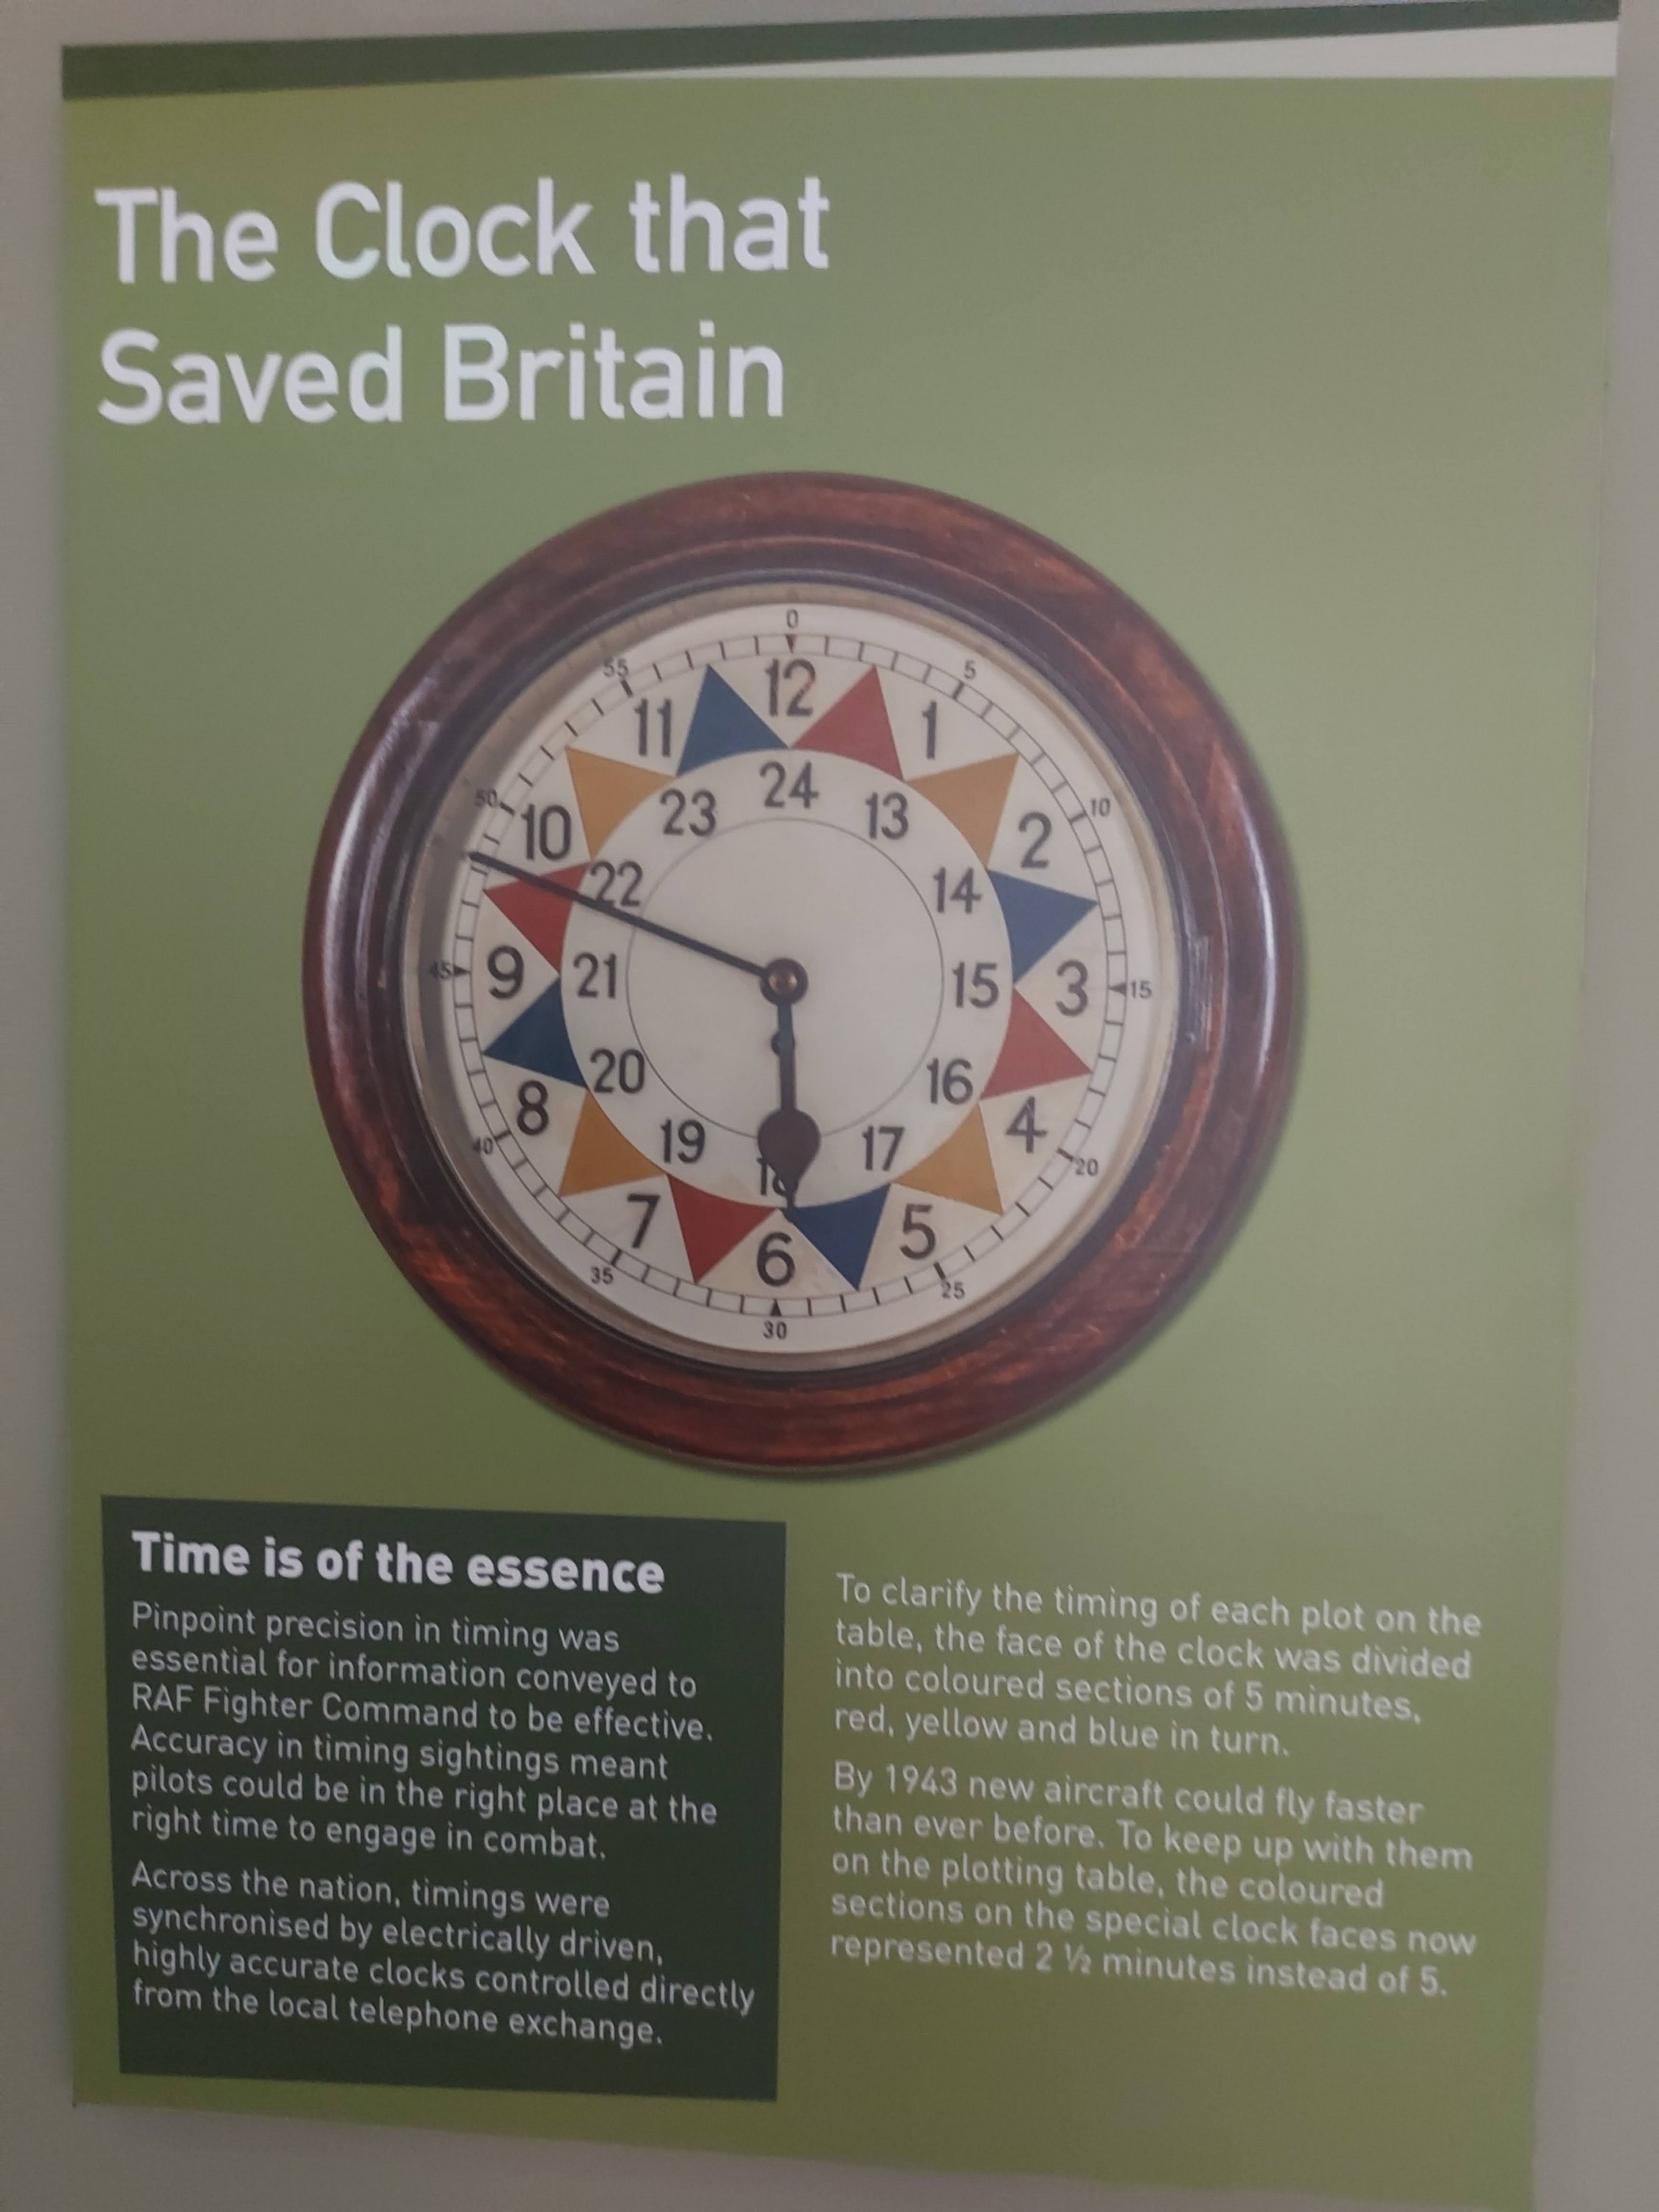 The clock that saved Britain